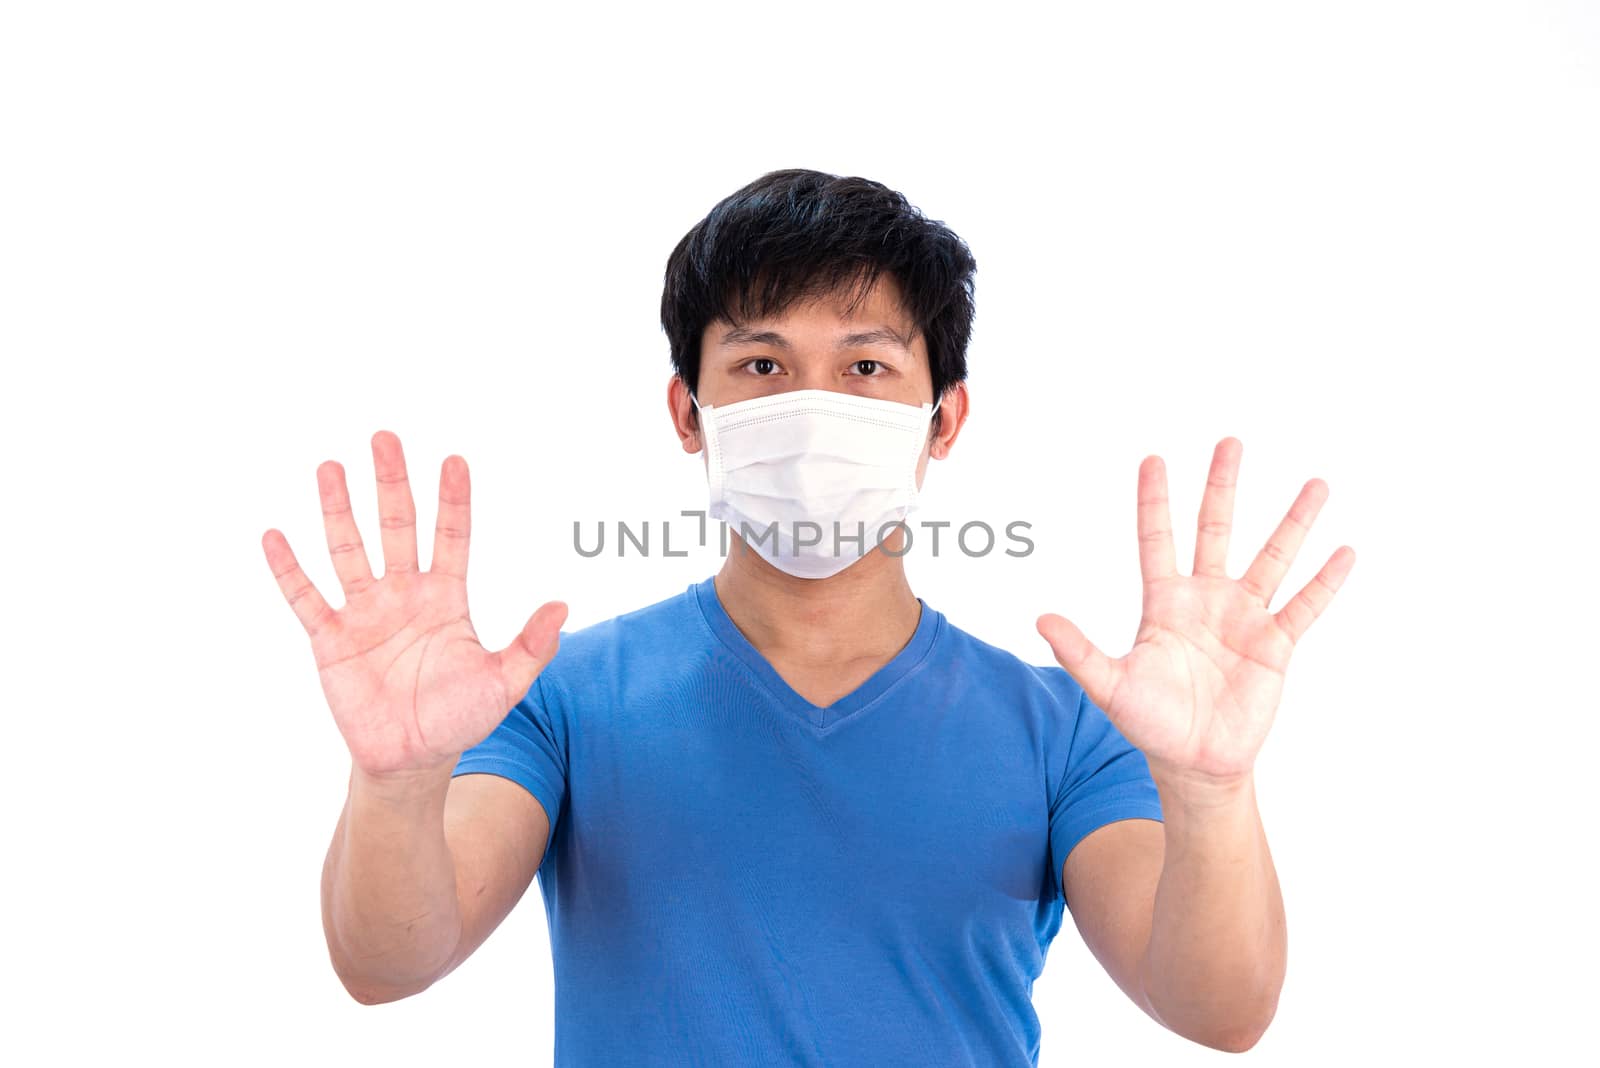 Asian young man in blue t-shirt top and medical mask to protect COVID-19 with isolated on white background concept.